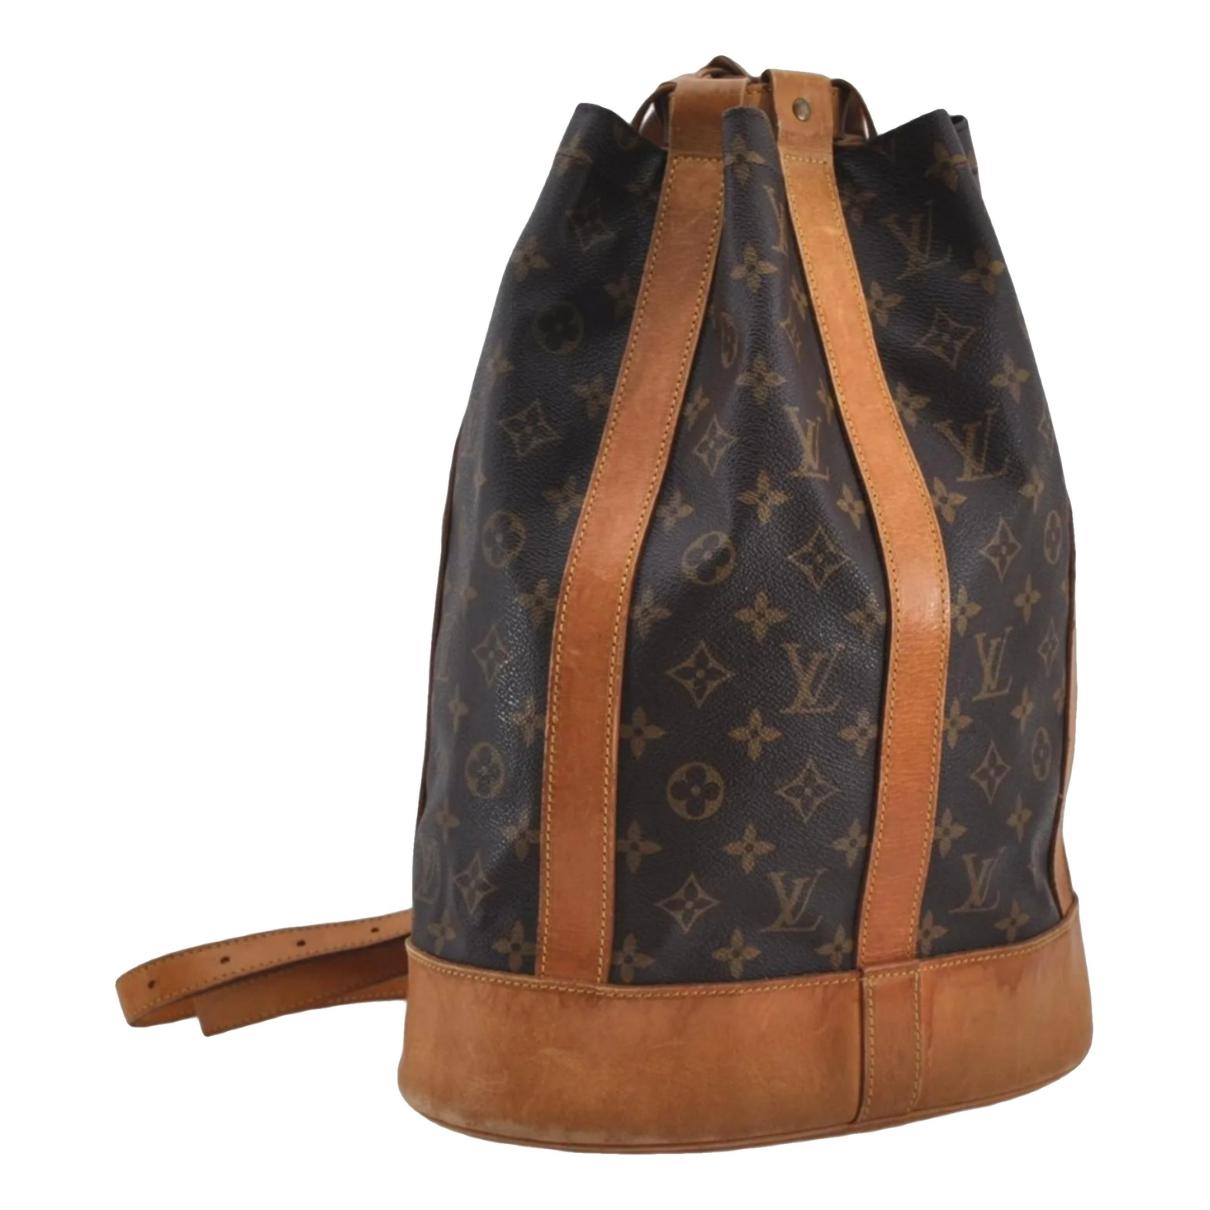 Marin leather backpack Louis Vuitton Orange in Leather - 36179830